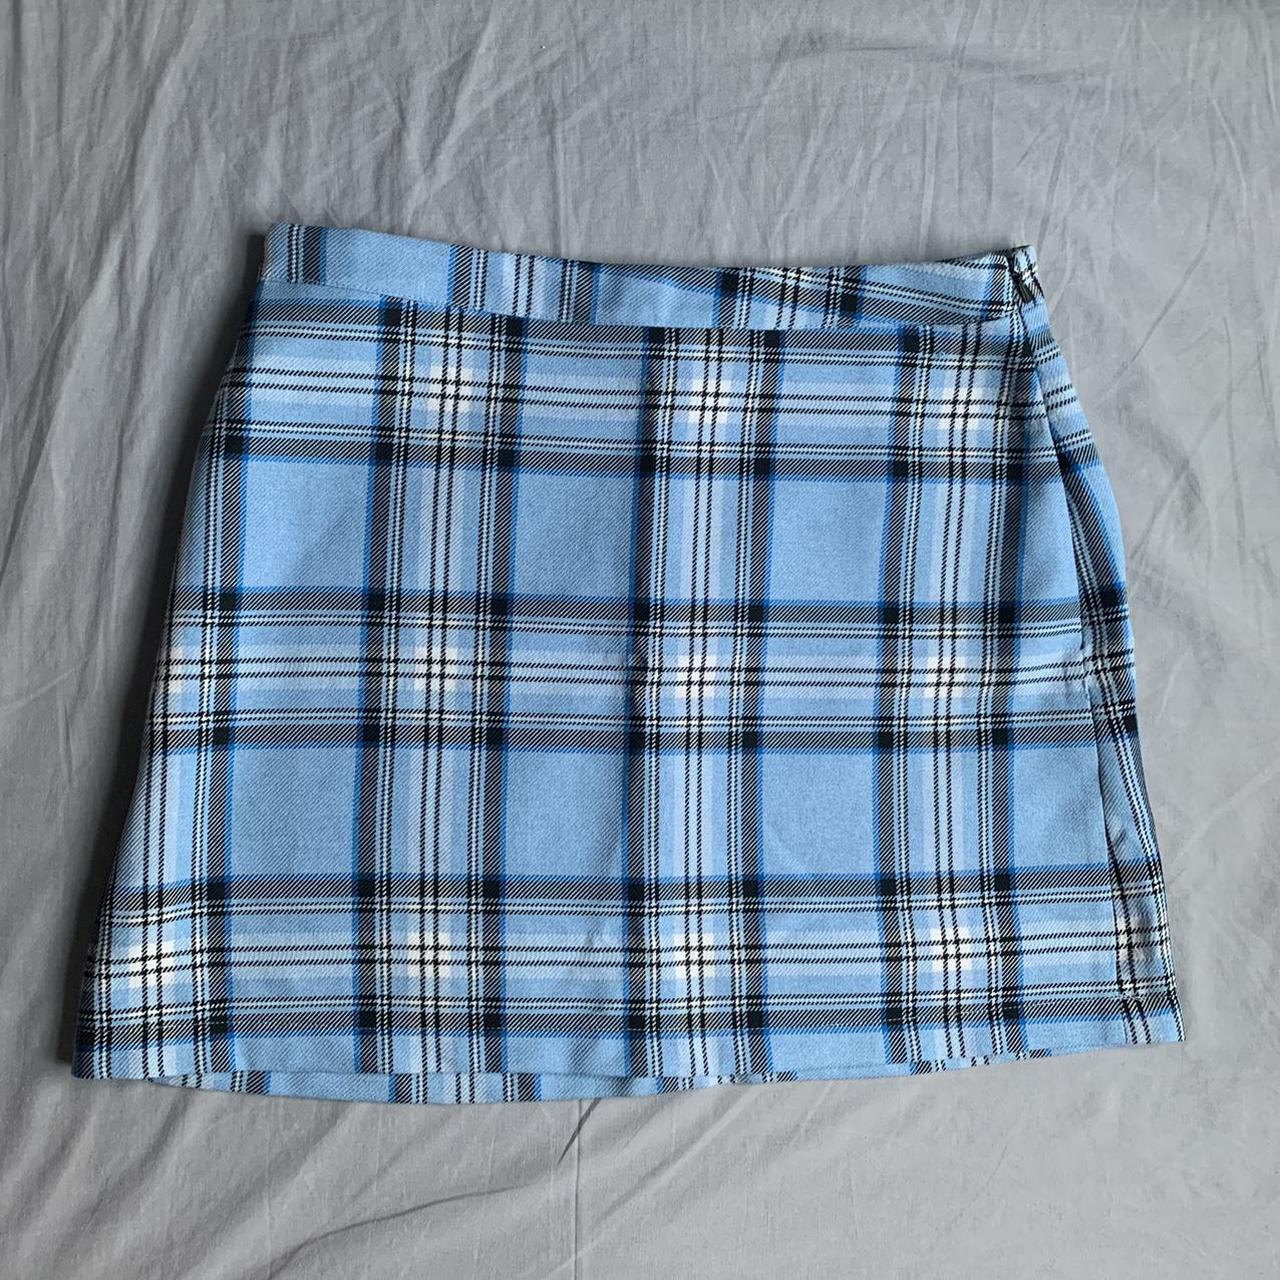 Urban Outfitters archive baby blue plaid skirt, in... - Depop